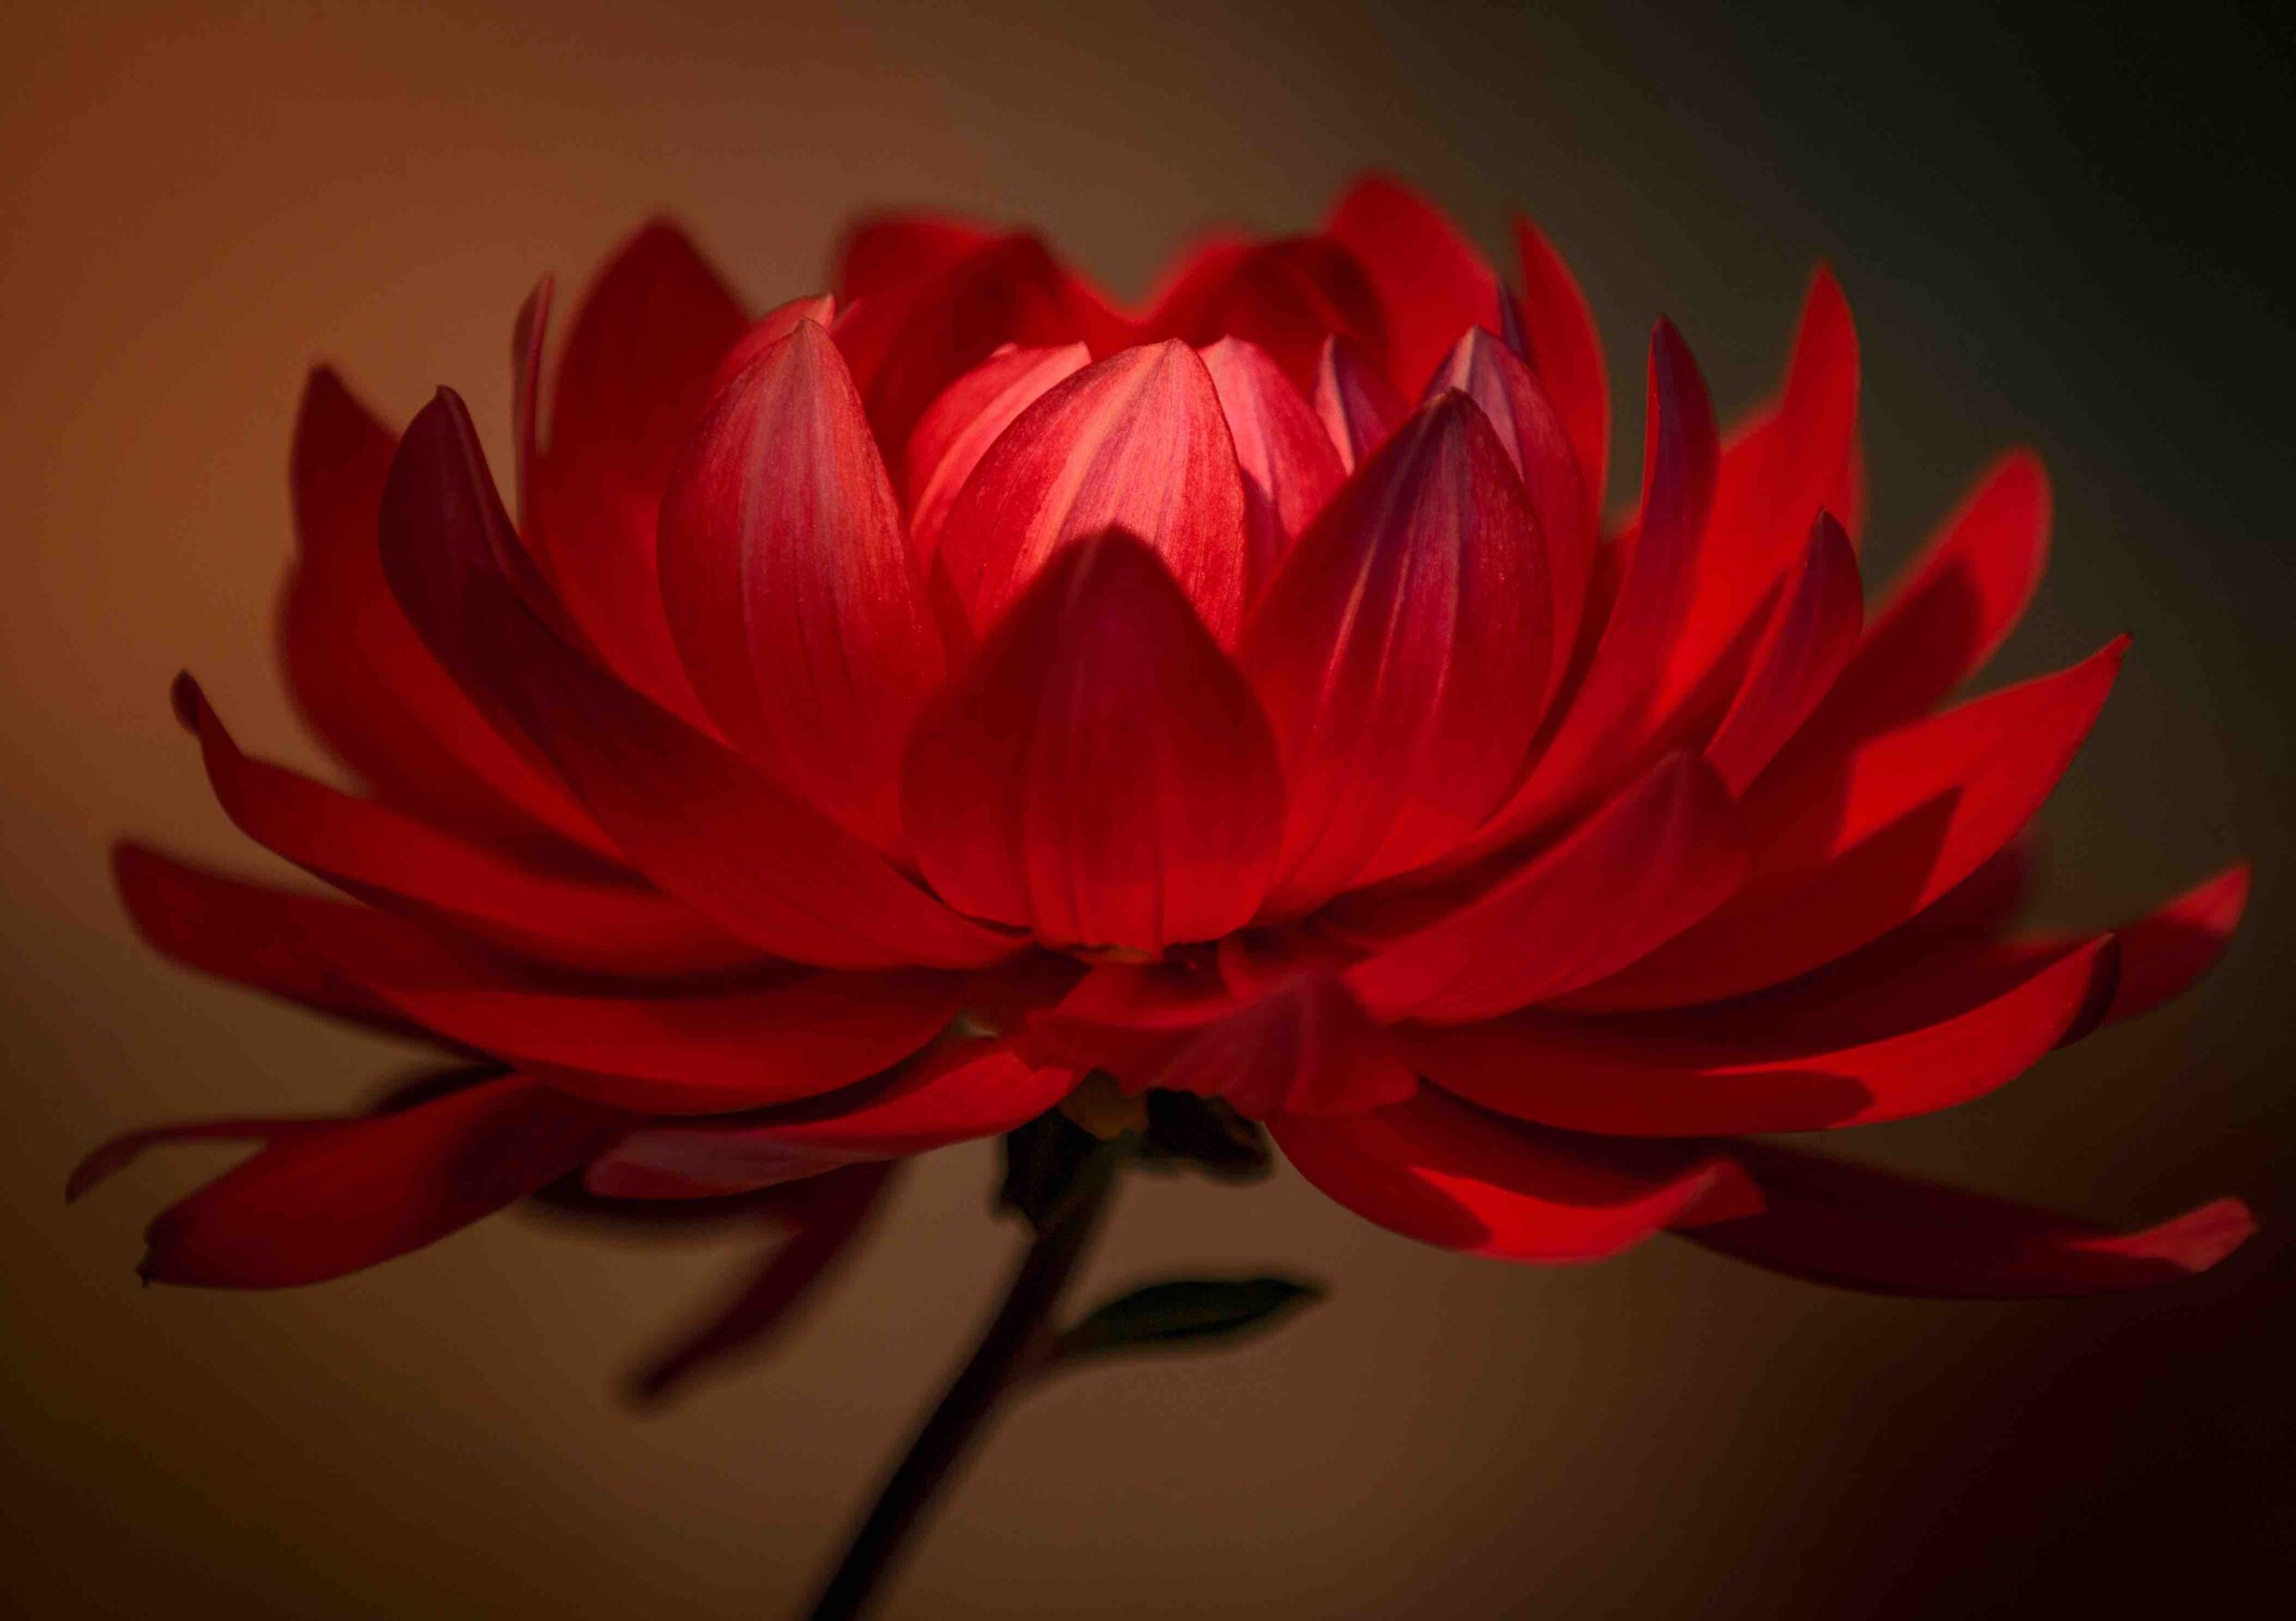 Photography of a red dahlia